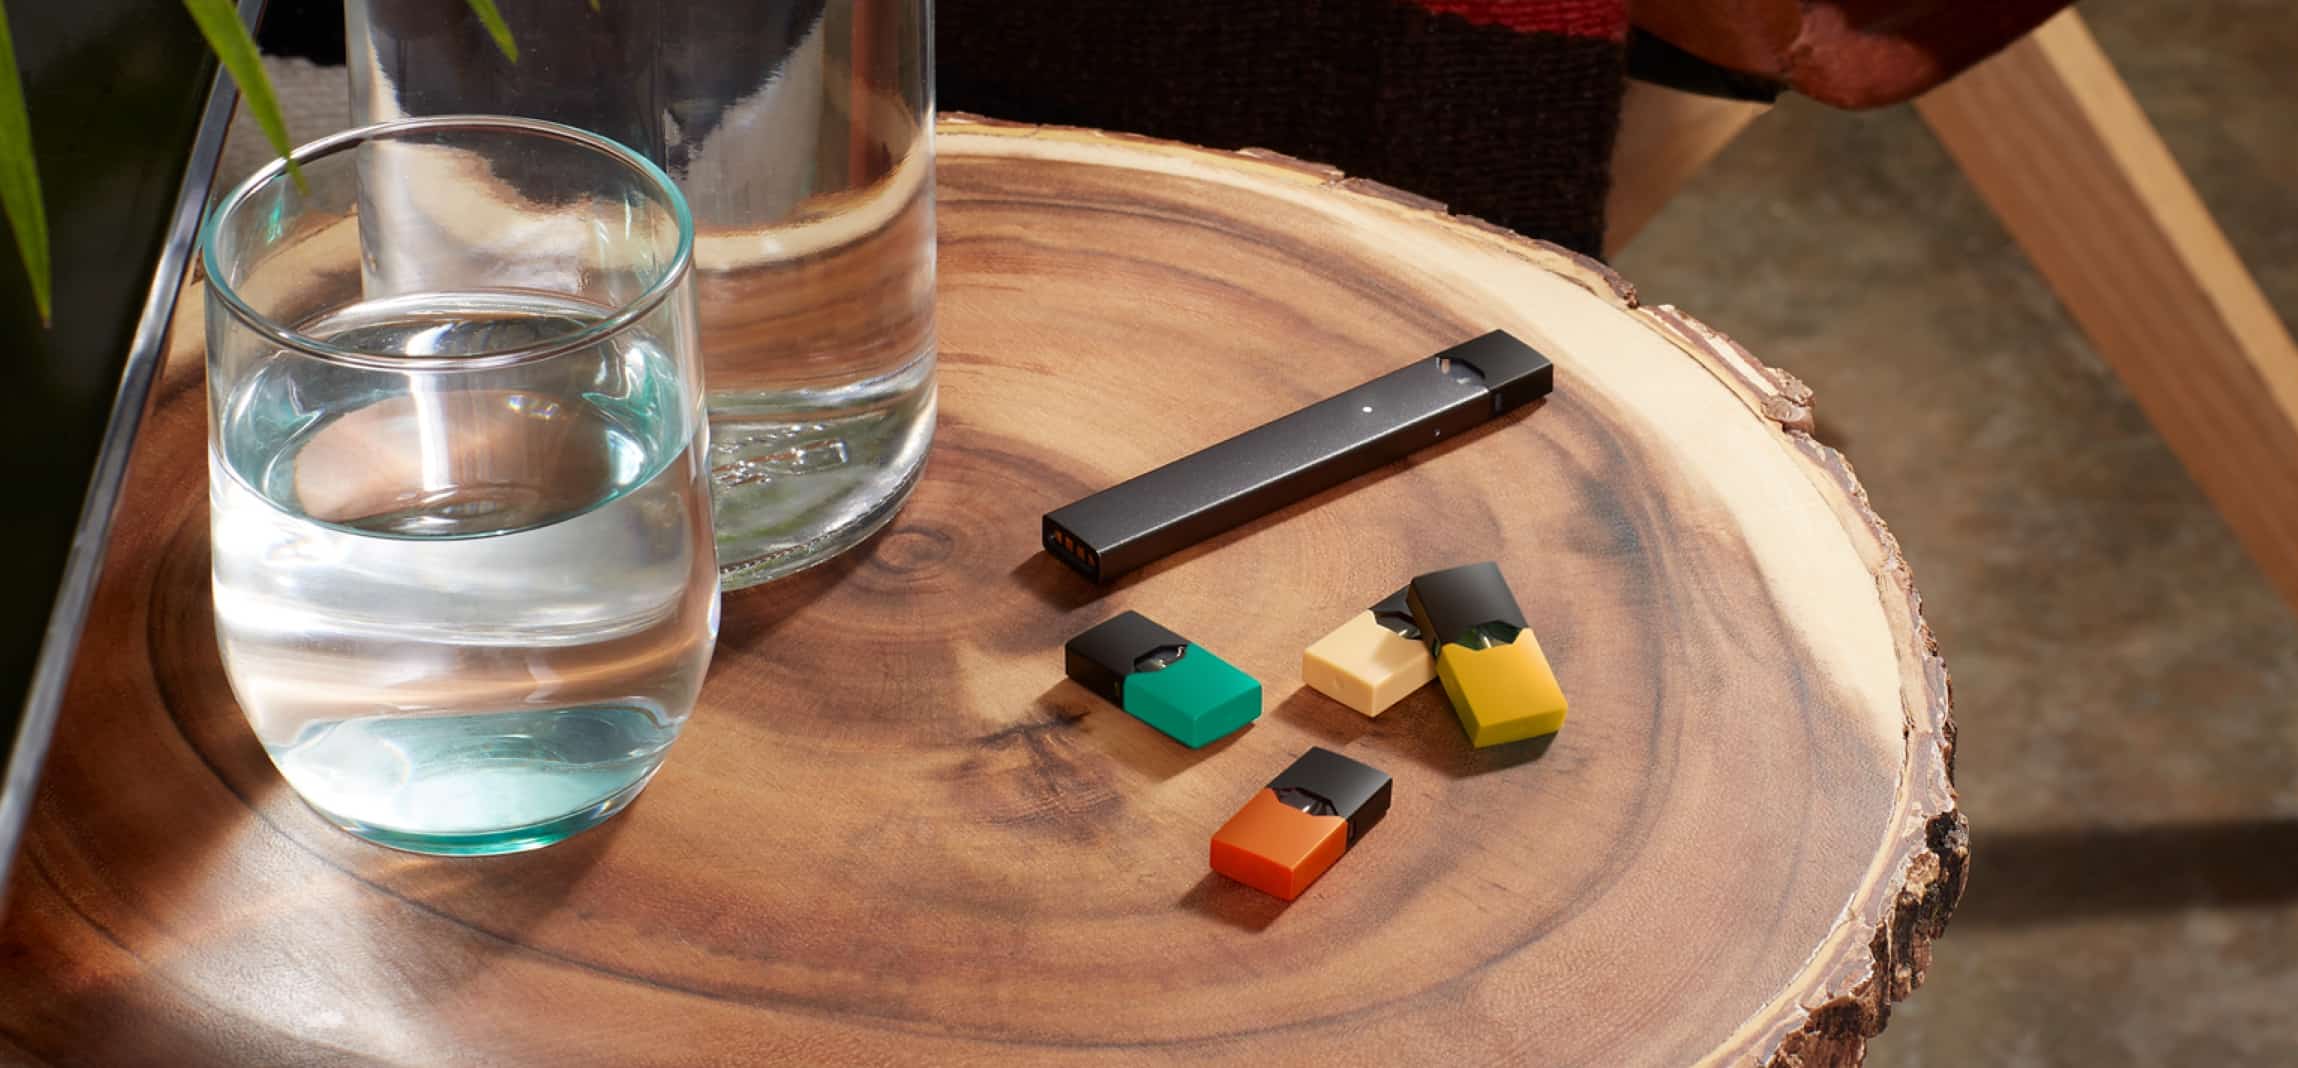 Juul Review. Juul Labs introduce the Juul e Cig to the UK